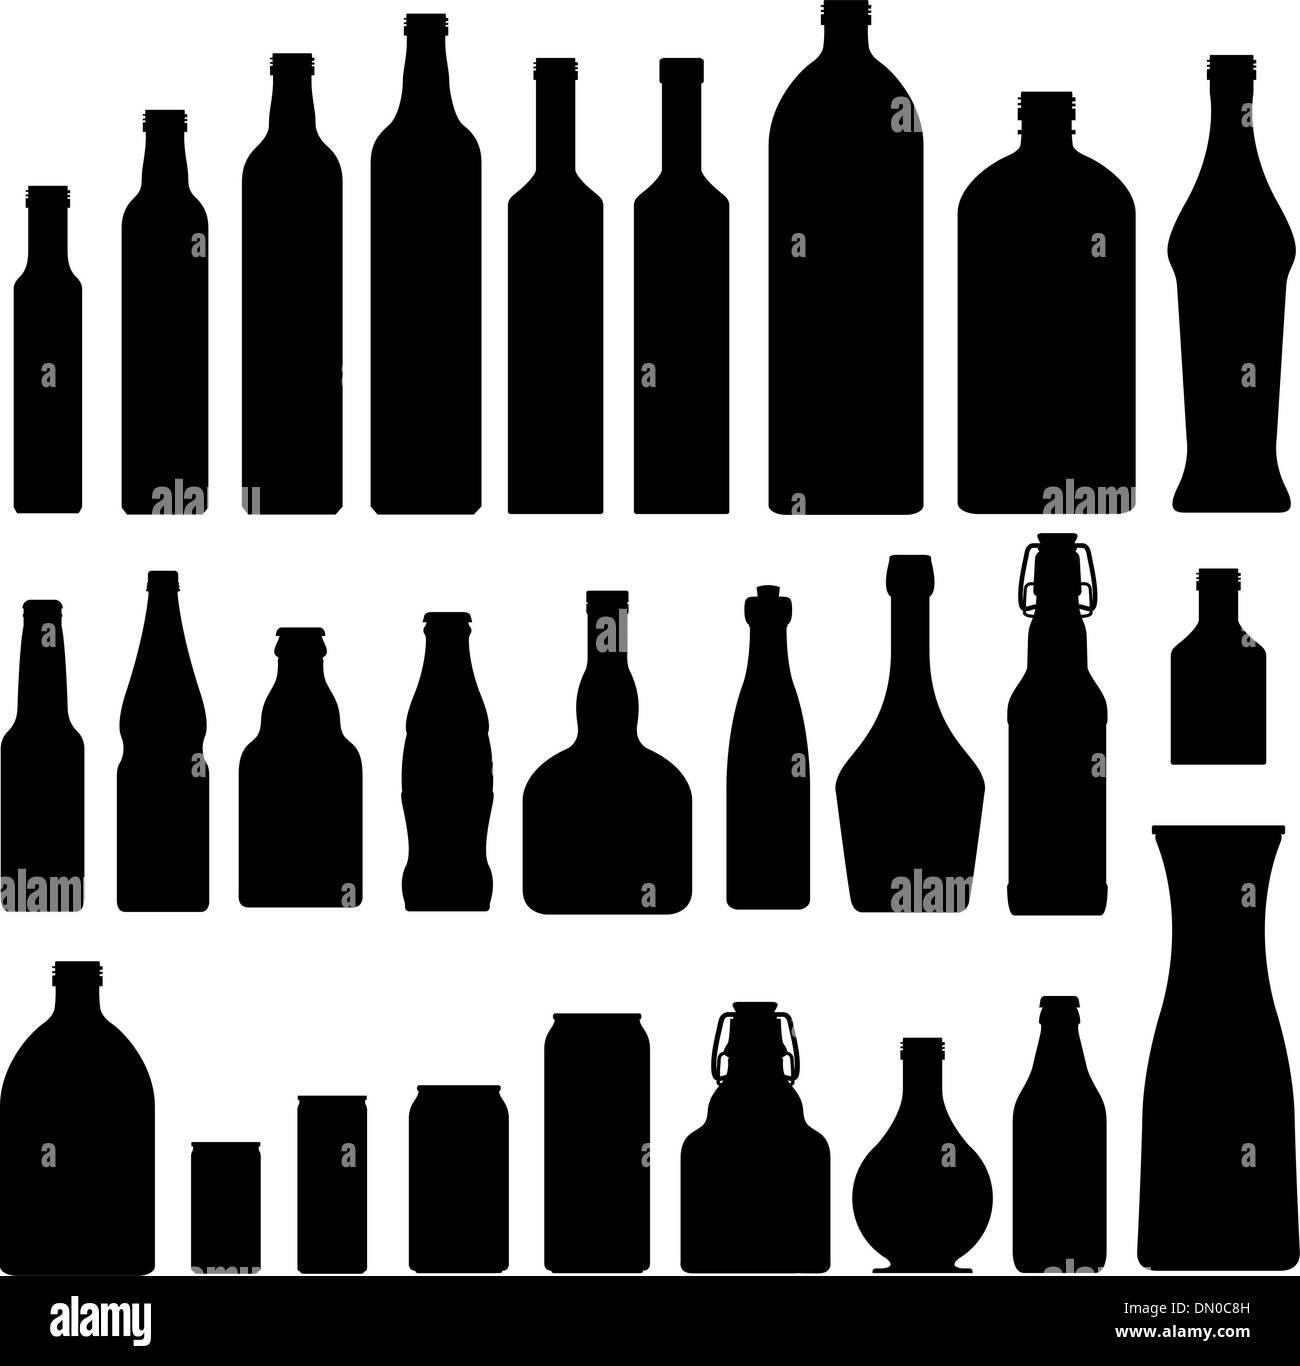 Bottles and jars vector silhouettes Stock Vector